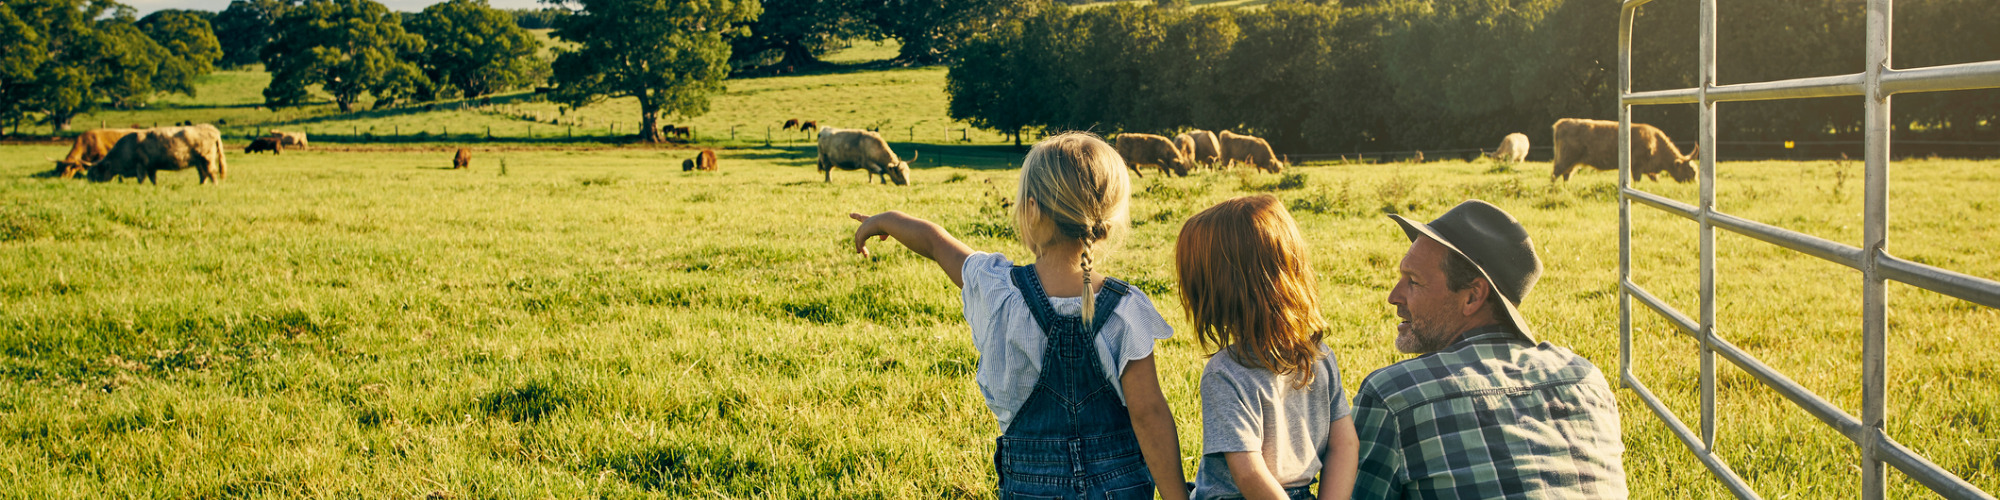 Divorce & The Family Farm - The Essential Tips